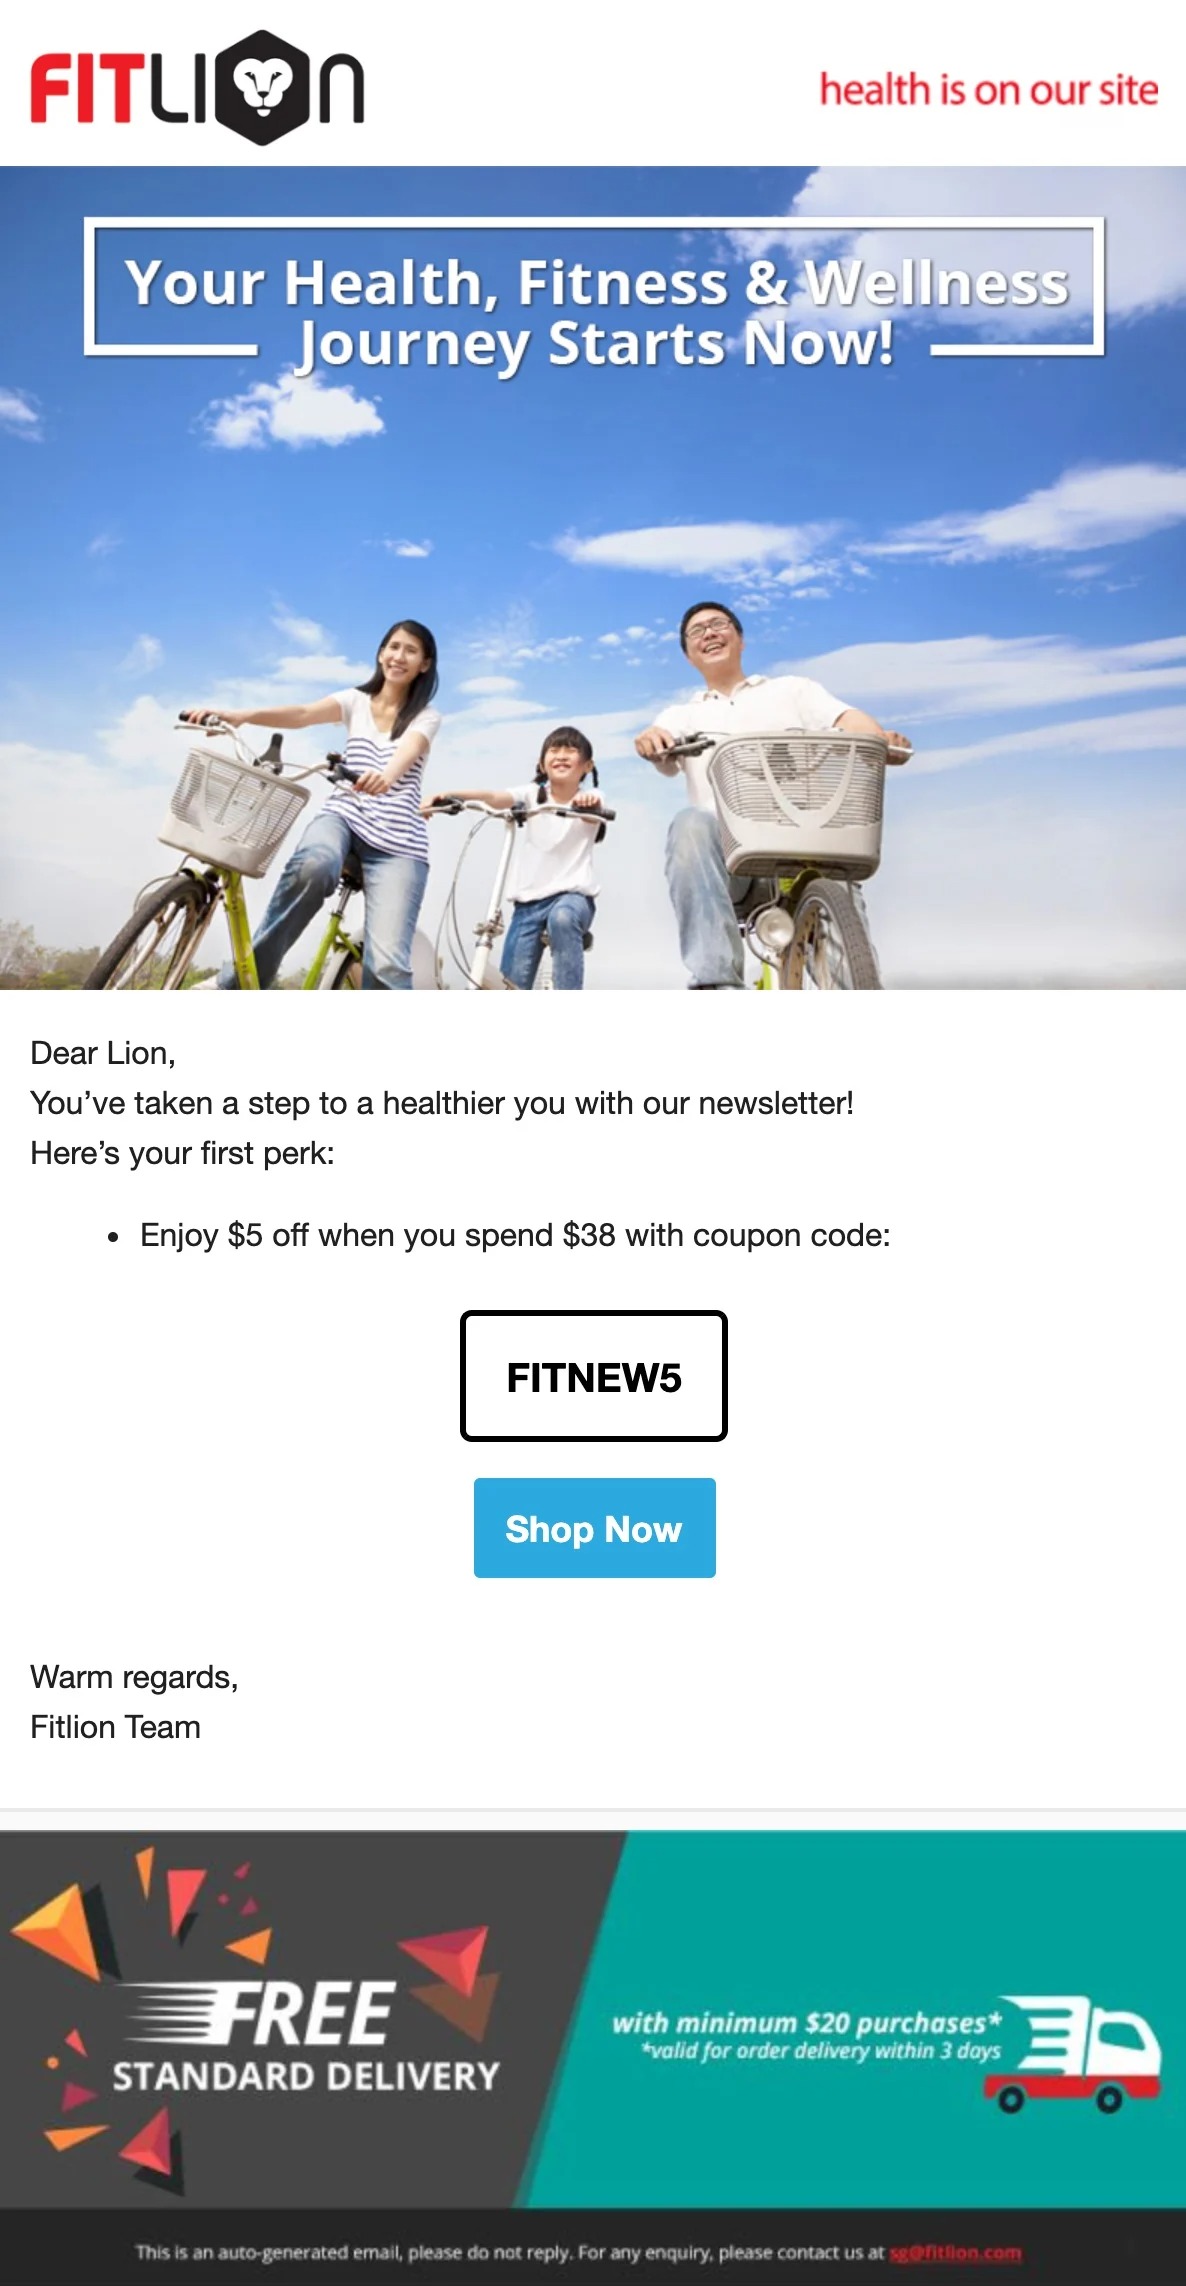 Welcome Email - Fitlion